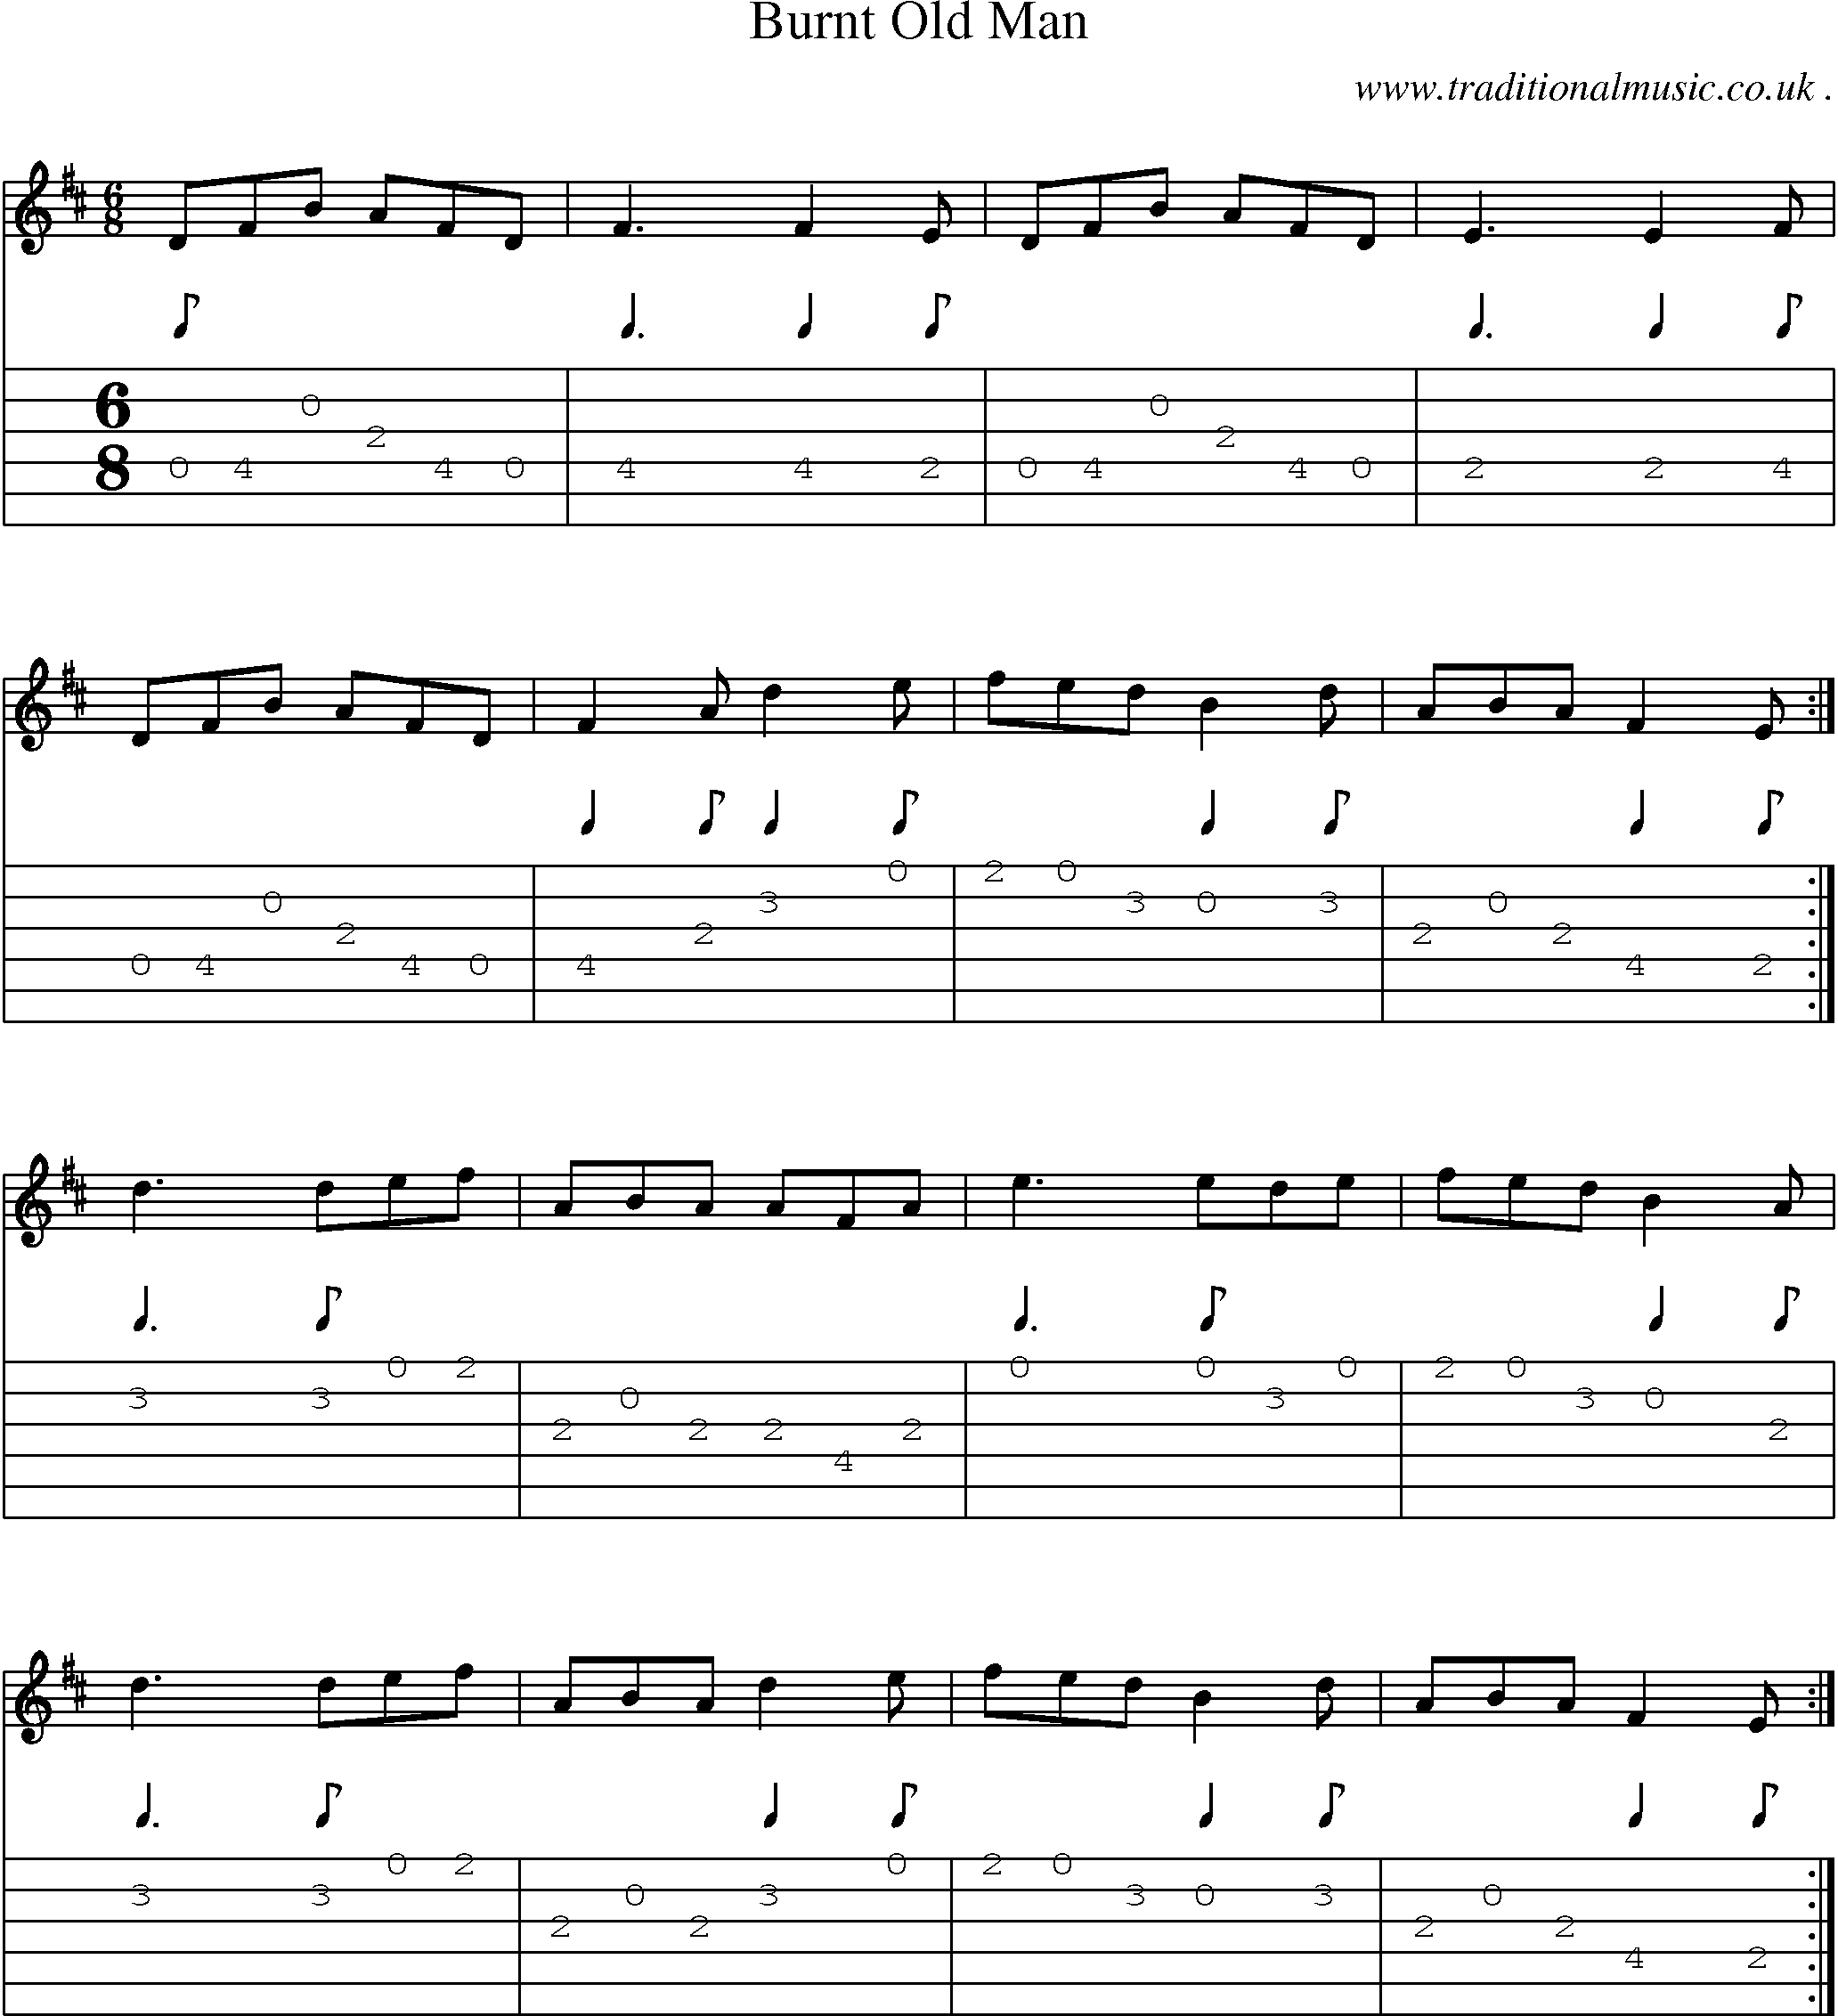 Sheet-Music and Guitar Tabs for Burnt Old Man